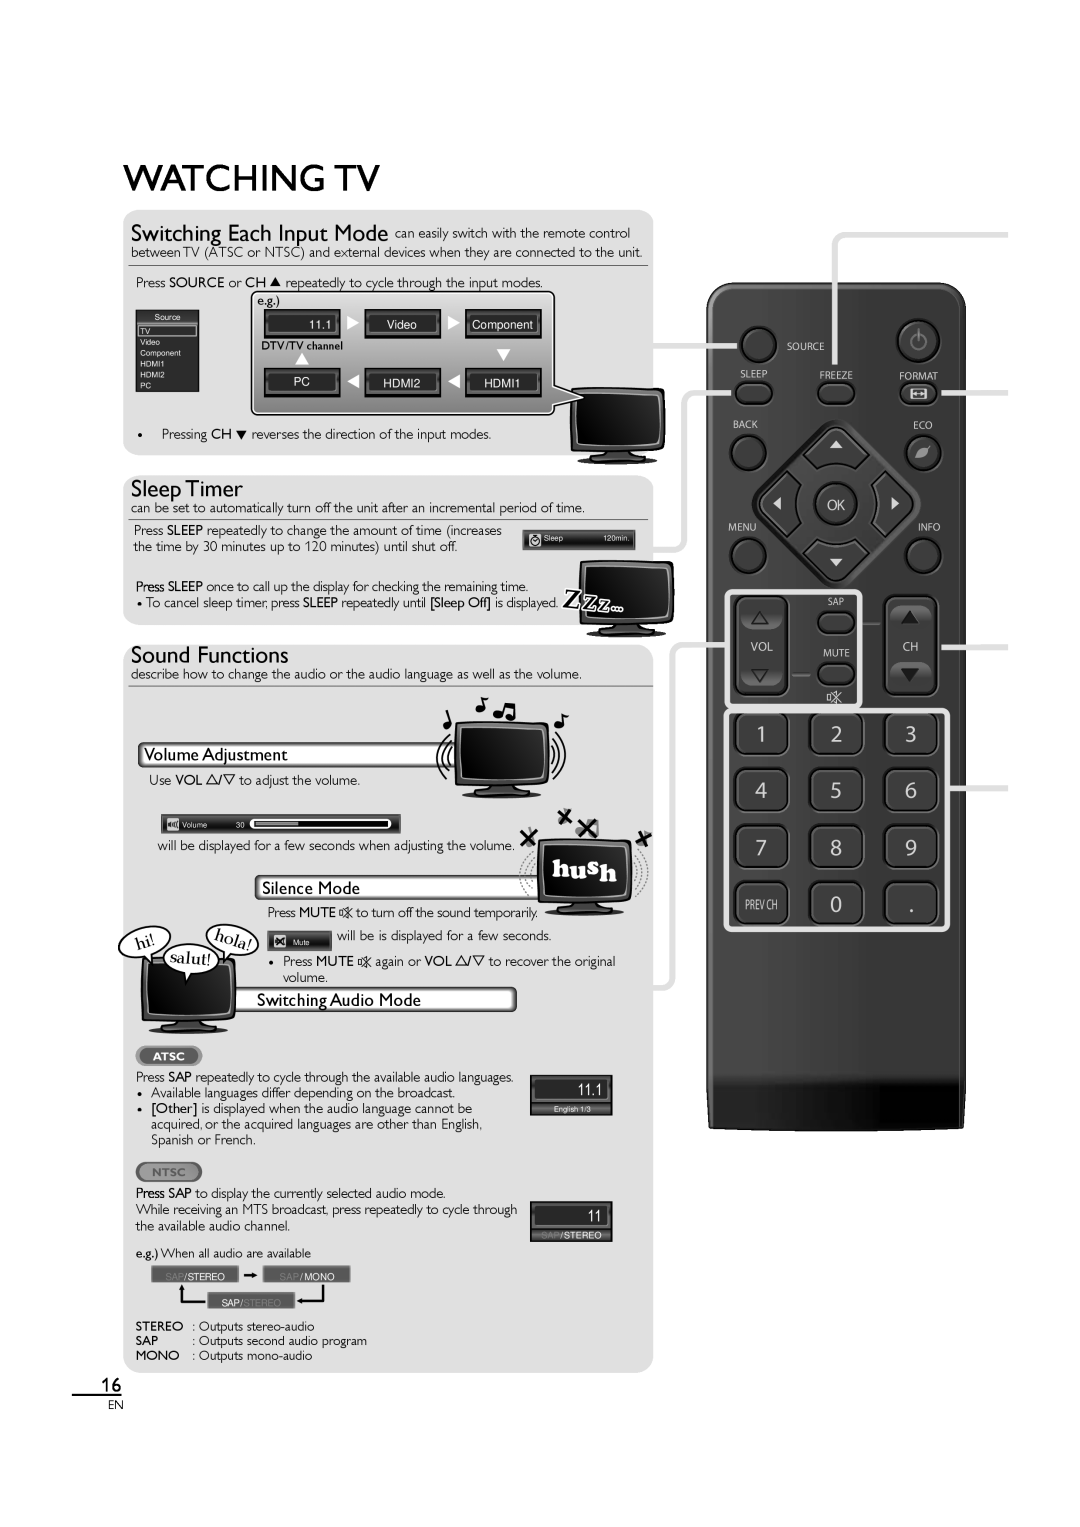 Sylvania LC190SL1 owner manual Watching Tv, Sleep Timer, Sound Functions, 1 2 4 5 7 8, hola, 11.1, Video 